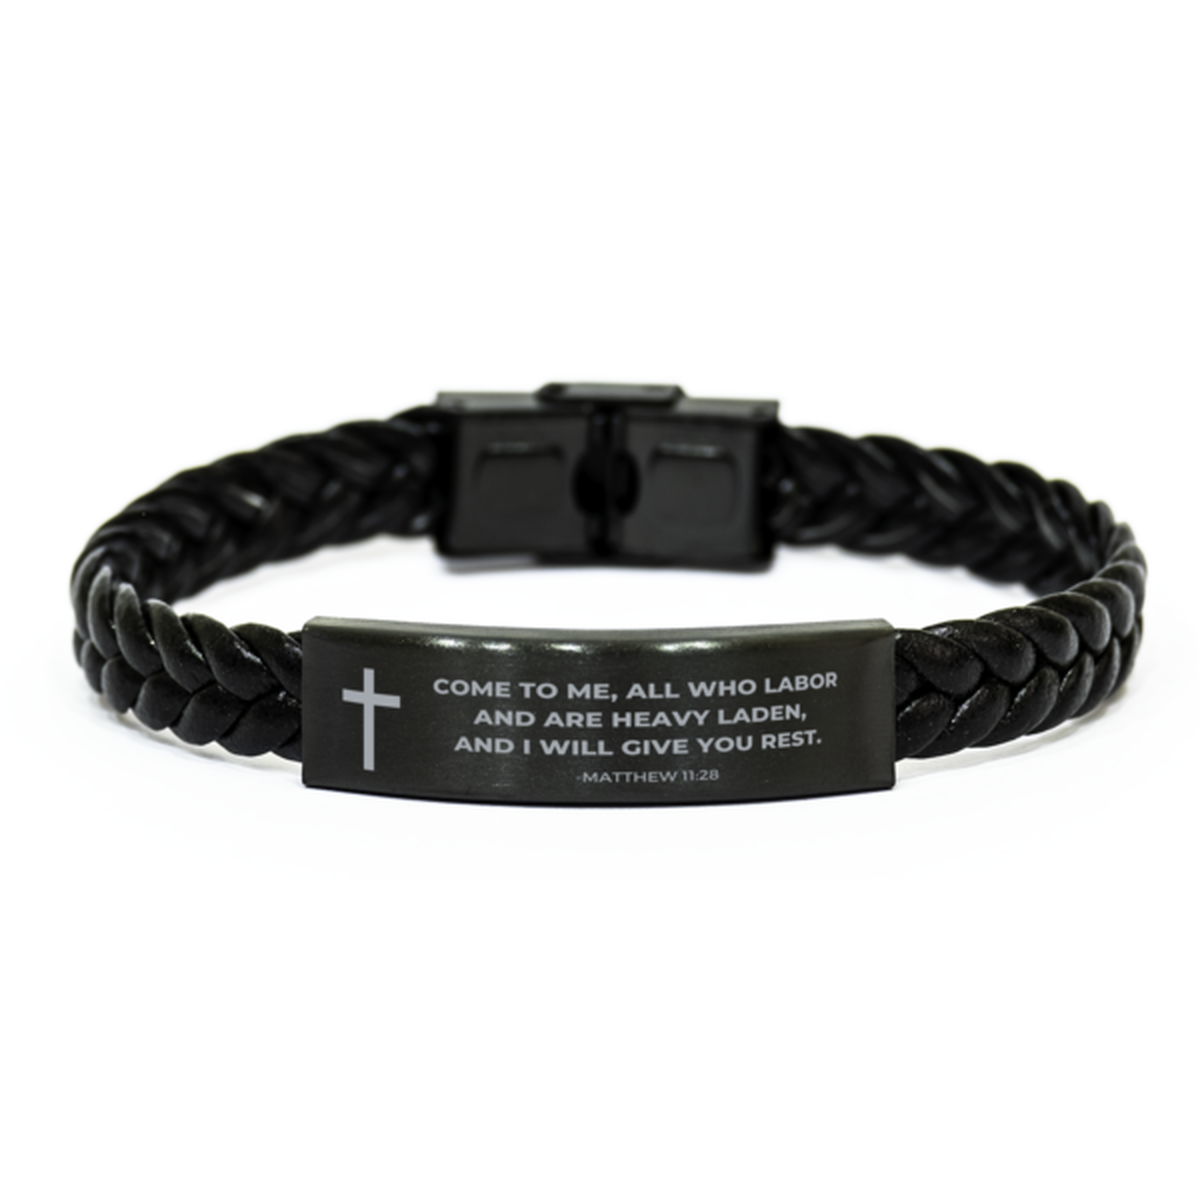 Baptism Gifts For Teenage Boys Girls, Christian Bible Verse Braided Leather Bracelet, Come to me, all who labor, Catholic Confirmation Gifts for Son, Godson, Grandson, Nephew